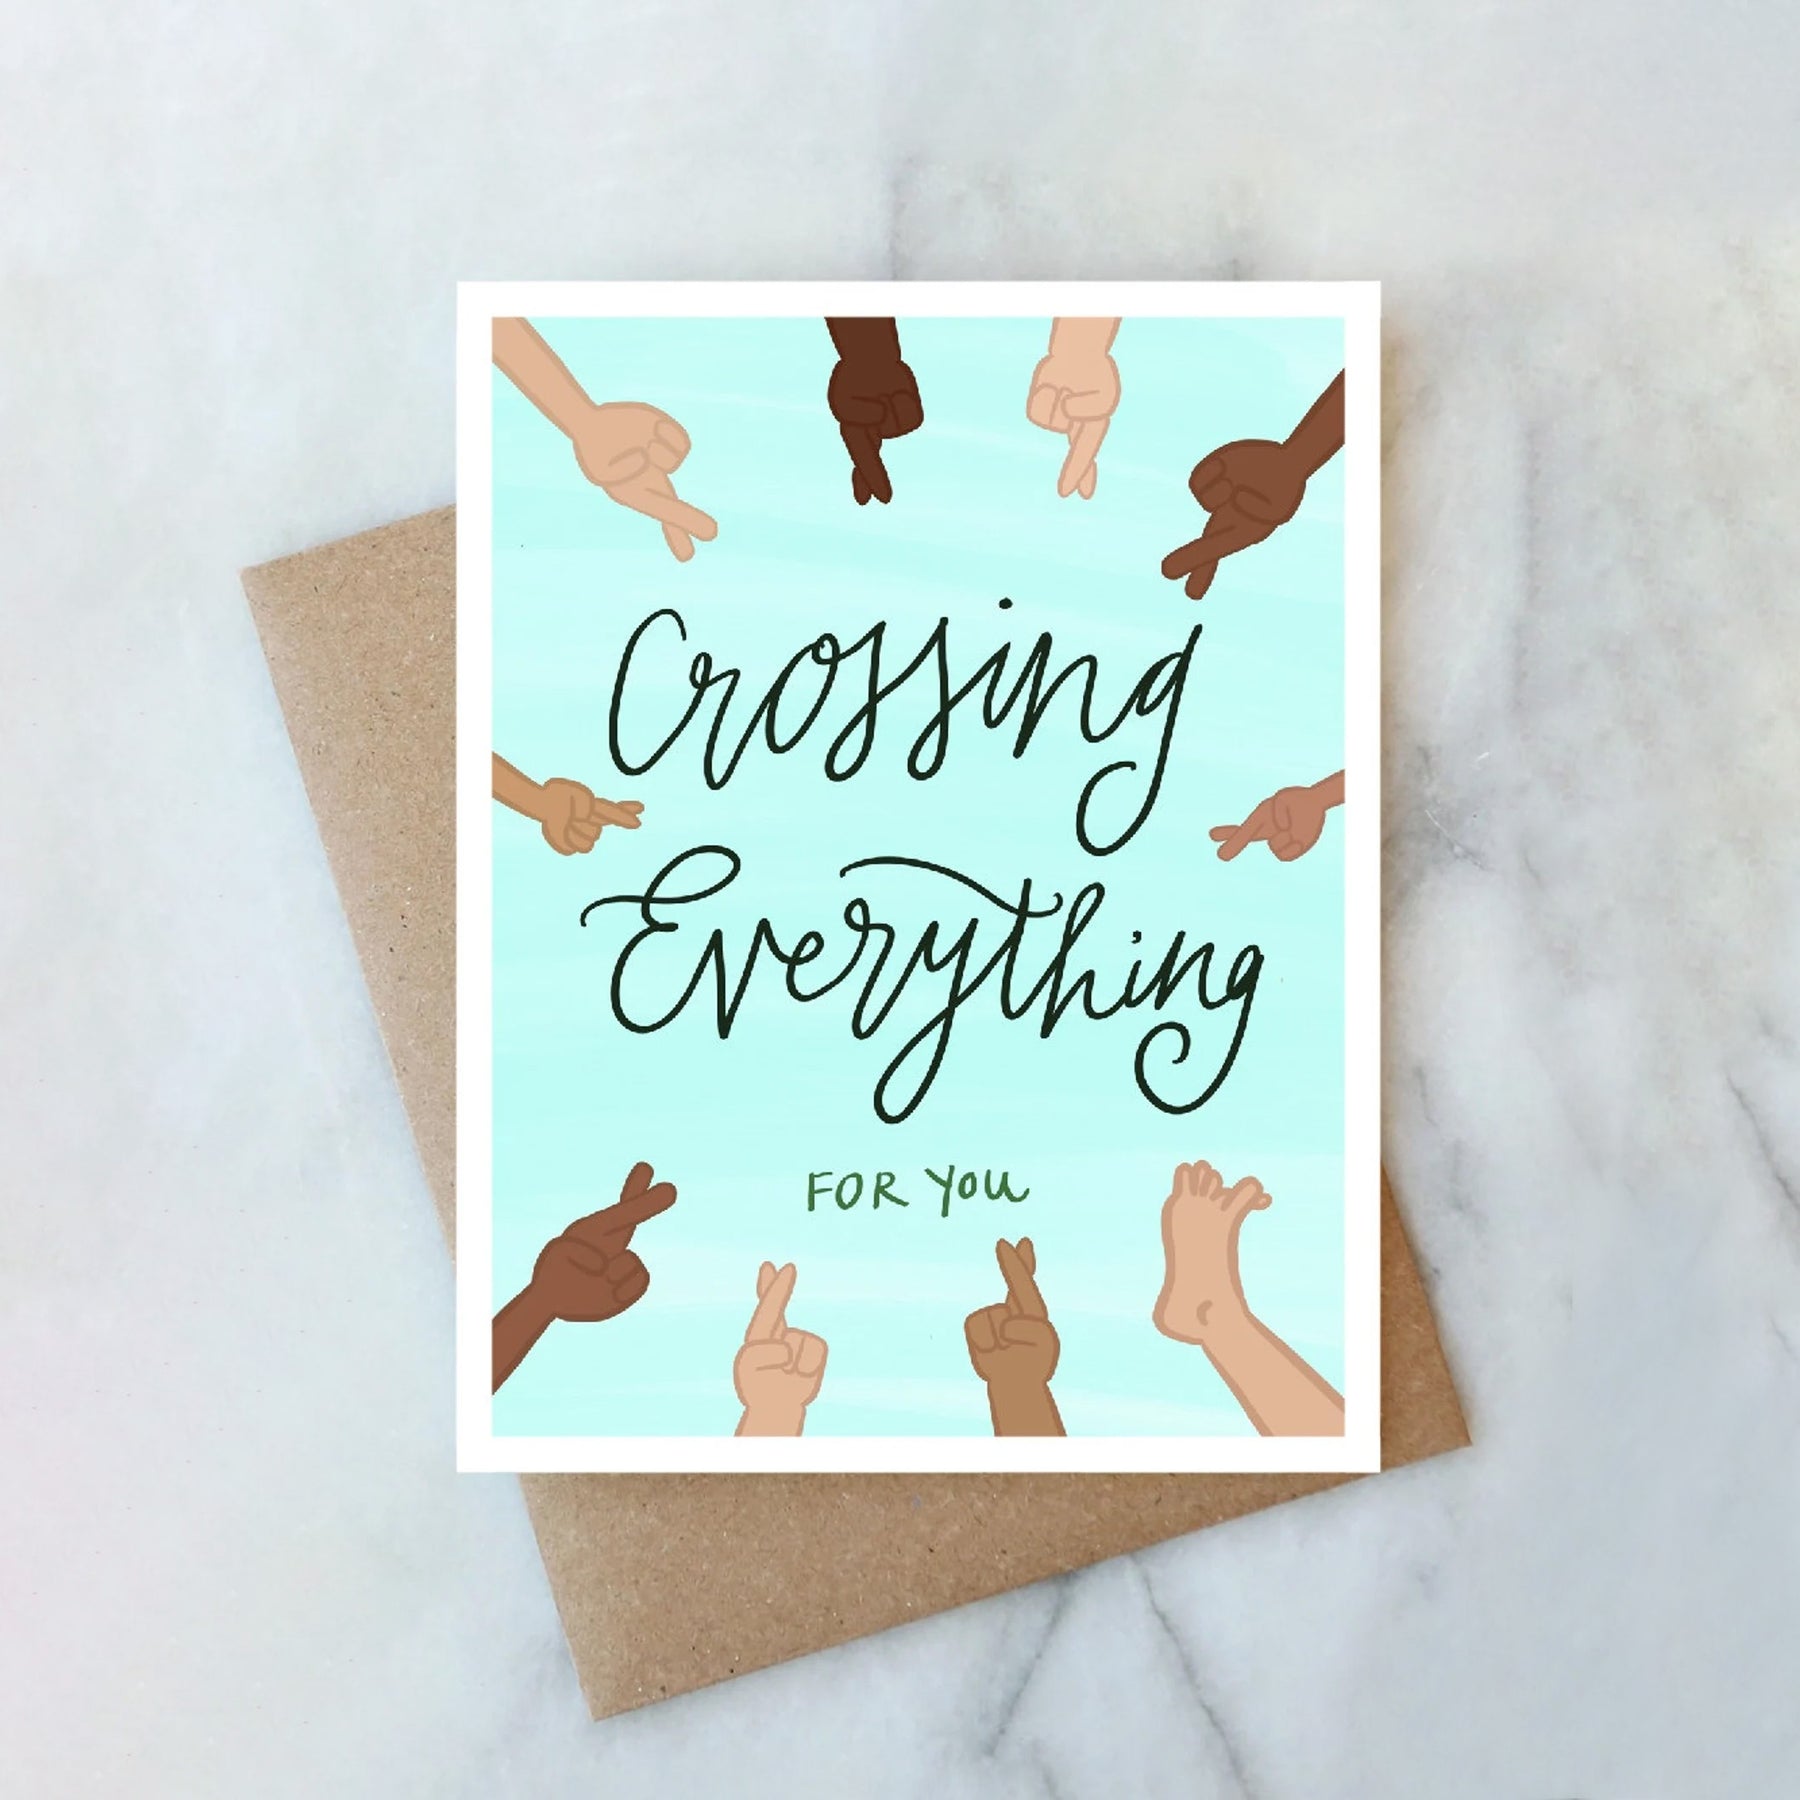 Crossing Everything For You - Greeting Card